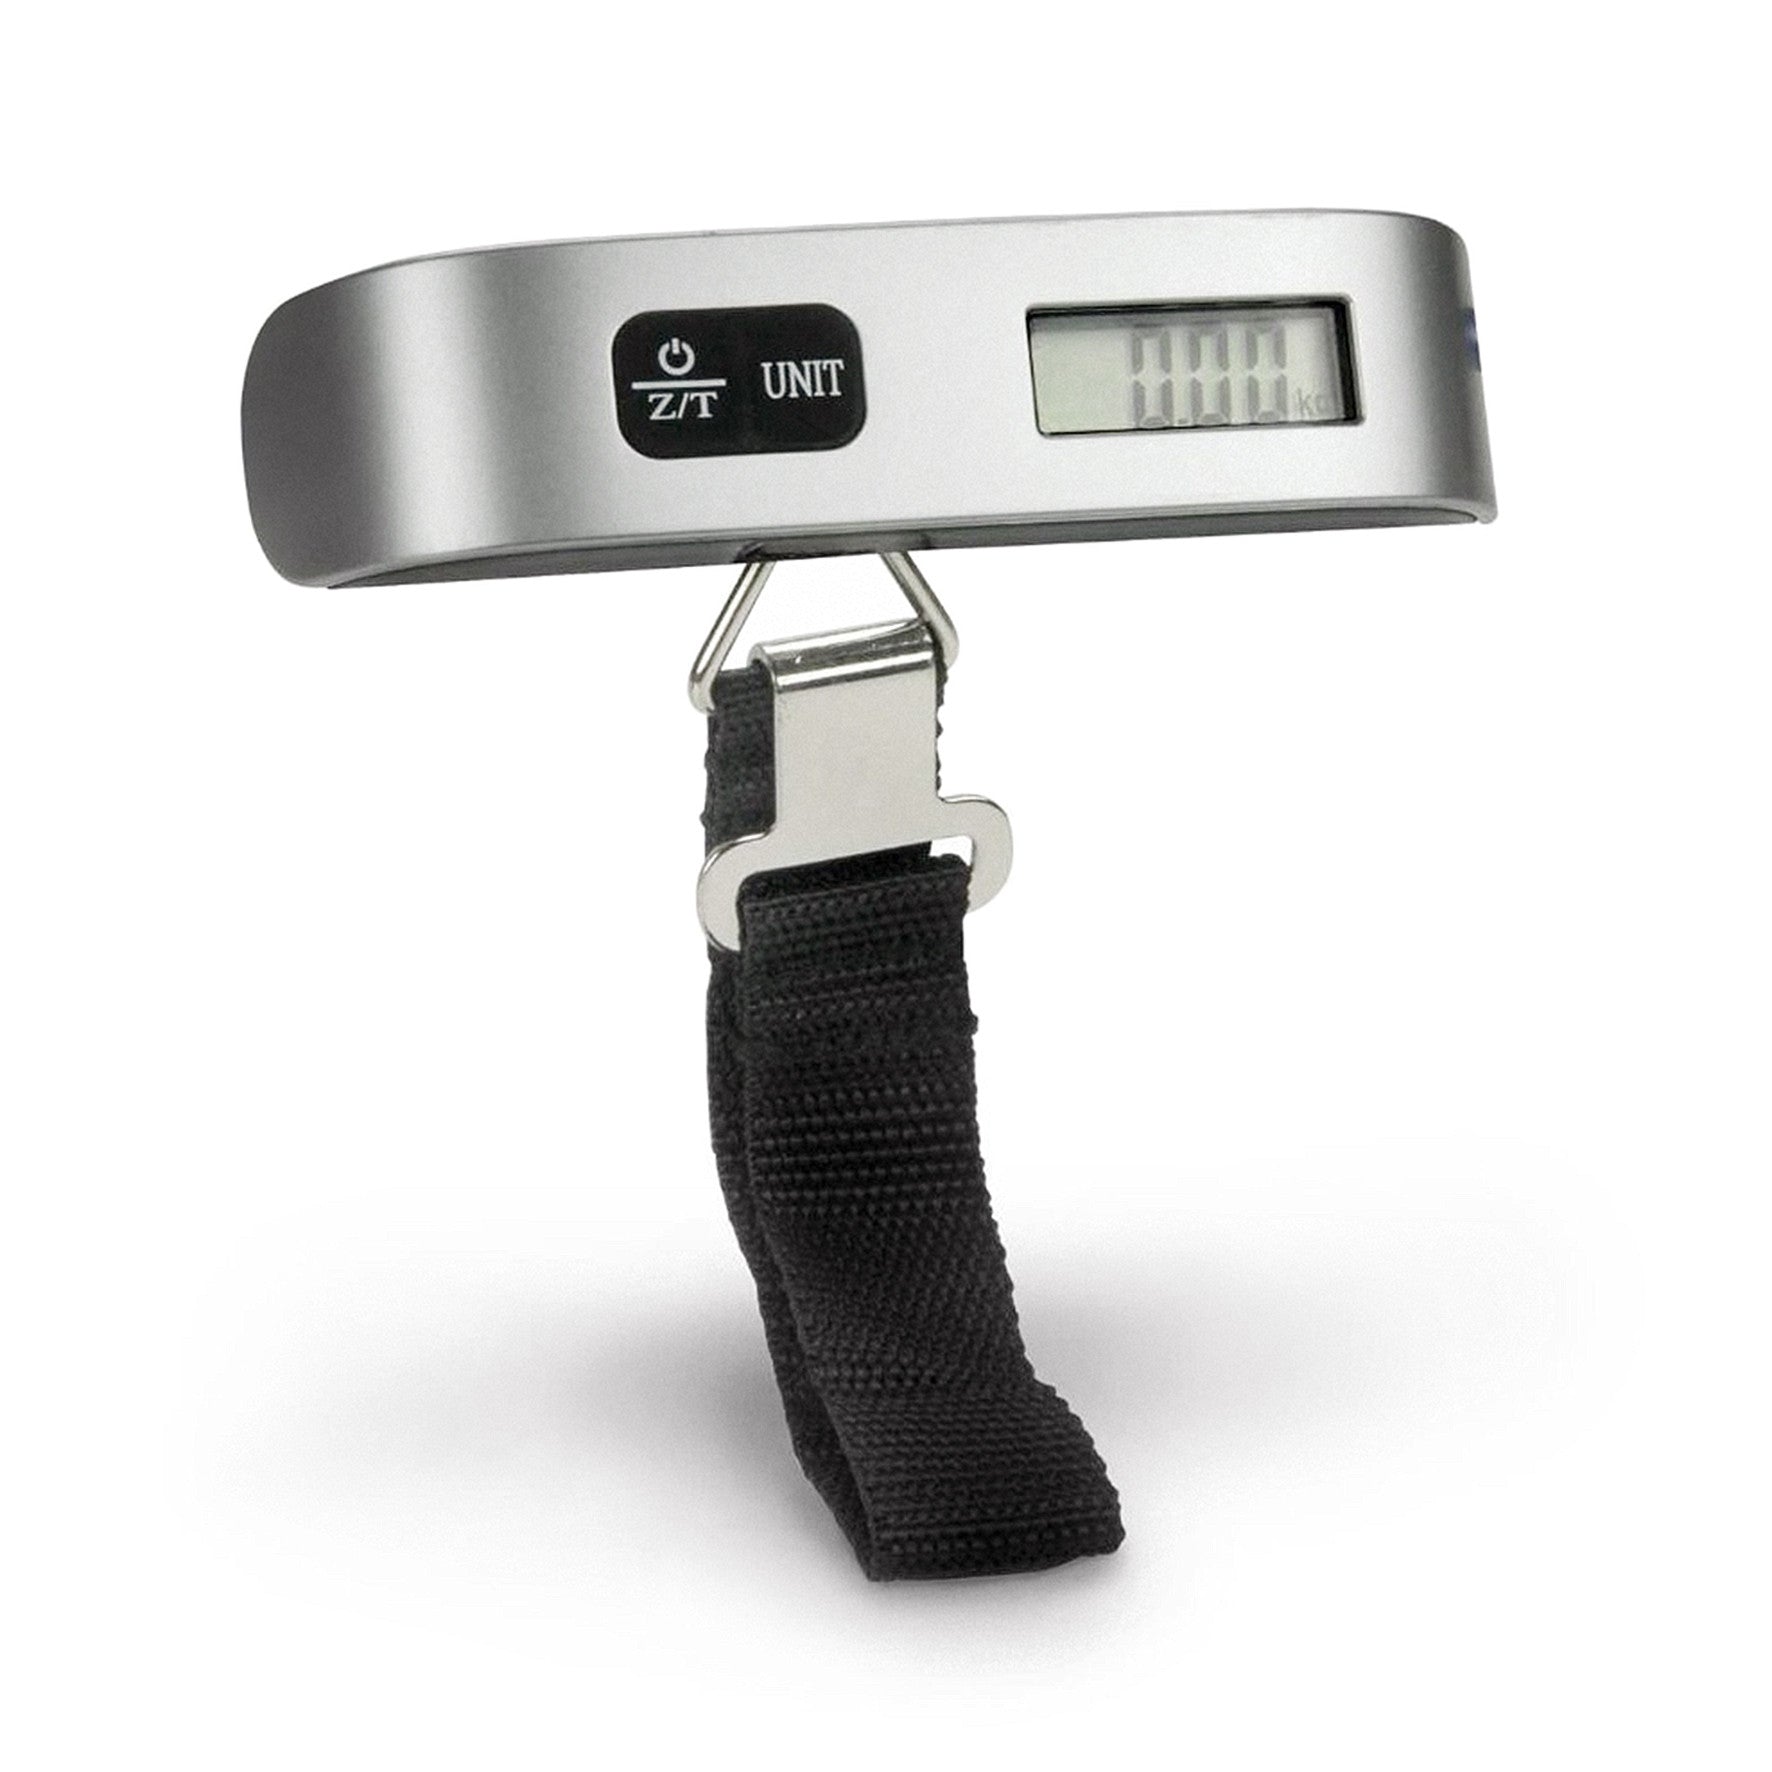 Digital Luggage Scale, 110LB Portable Handheld Baggage Scale for